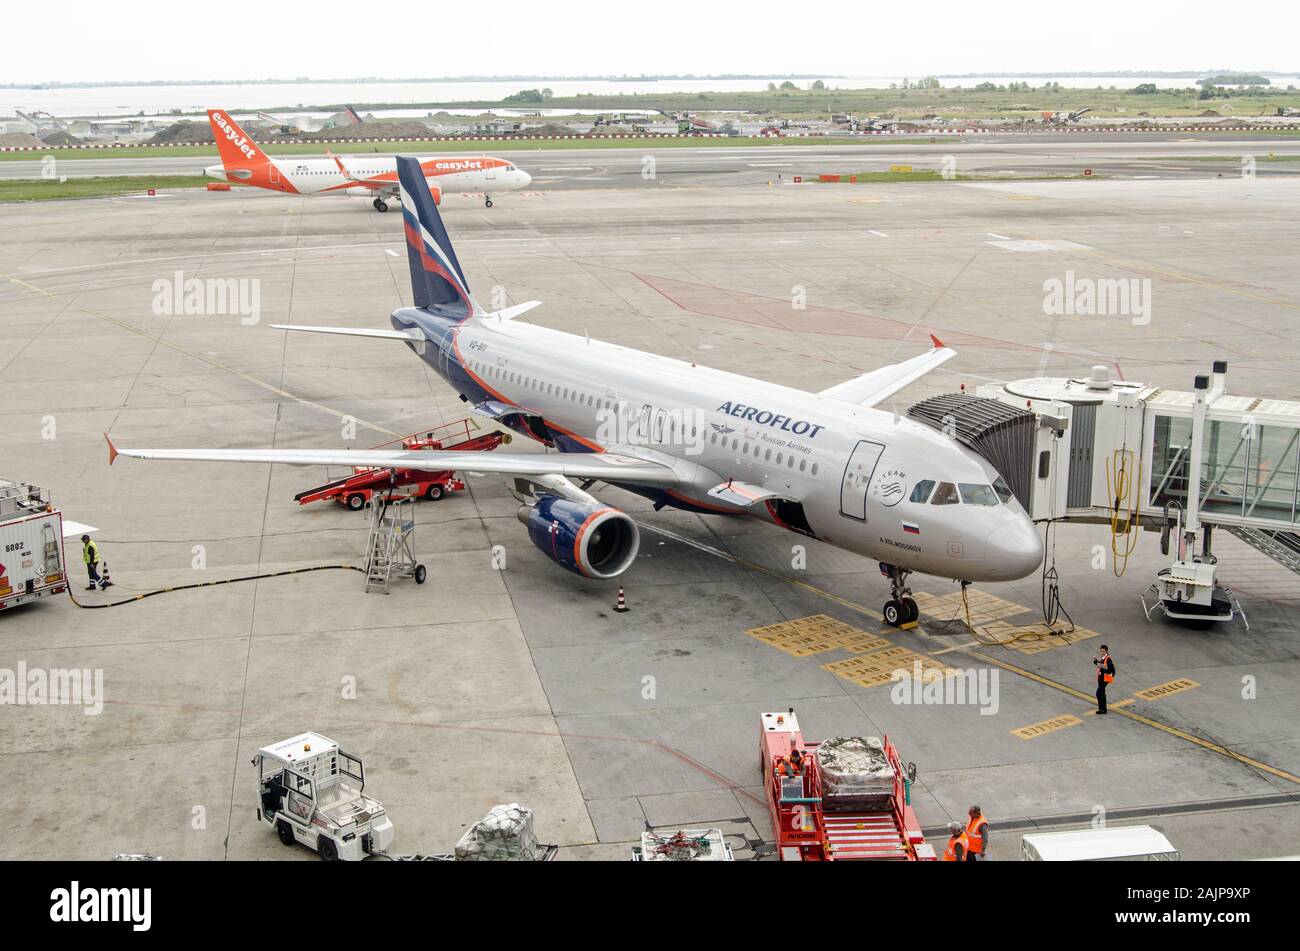 VENICE, Italy - MAY 22, 2019:  Aeroflot Airbus A320-214 parked at Marco Polo Airport, Venice. The plane is named after the mathematician Andrey Kolmog Stock Photo